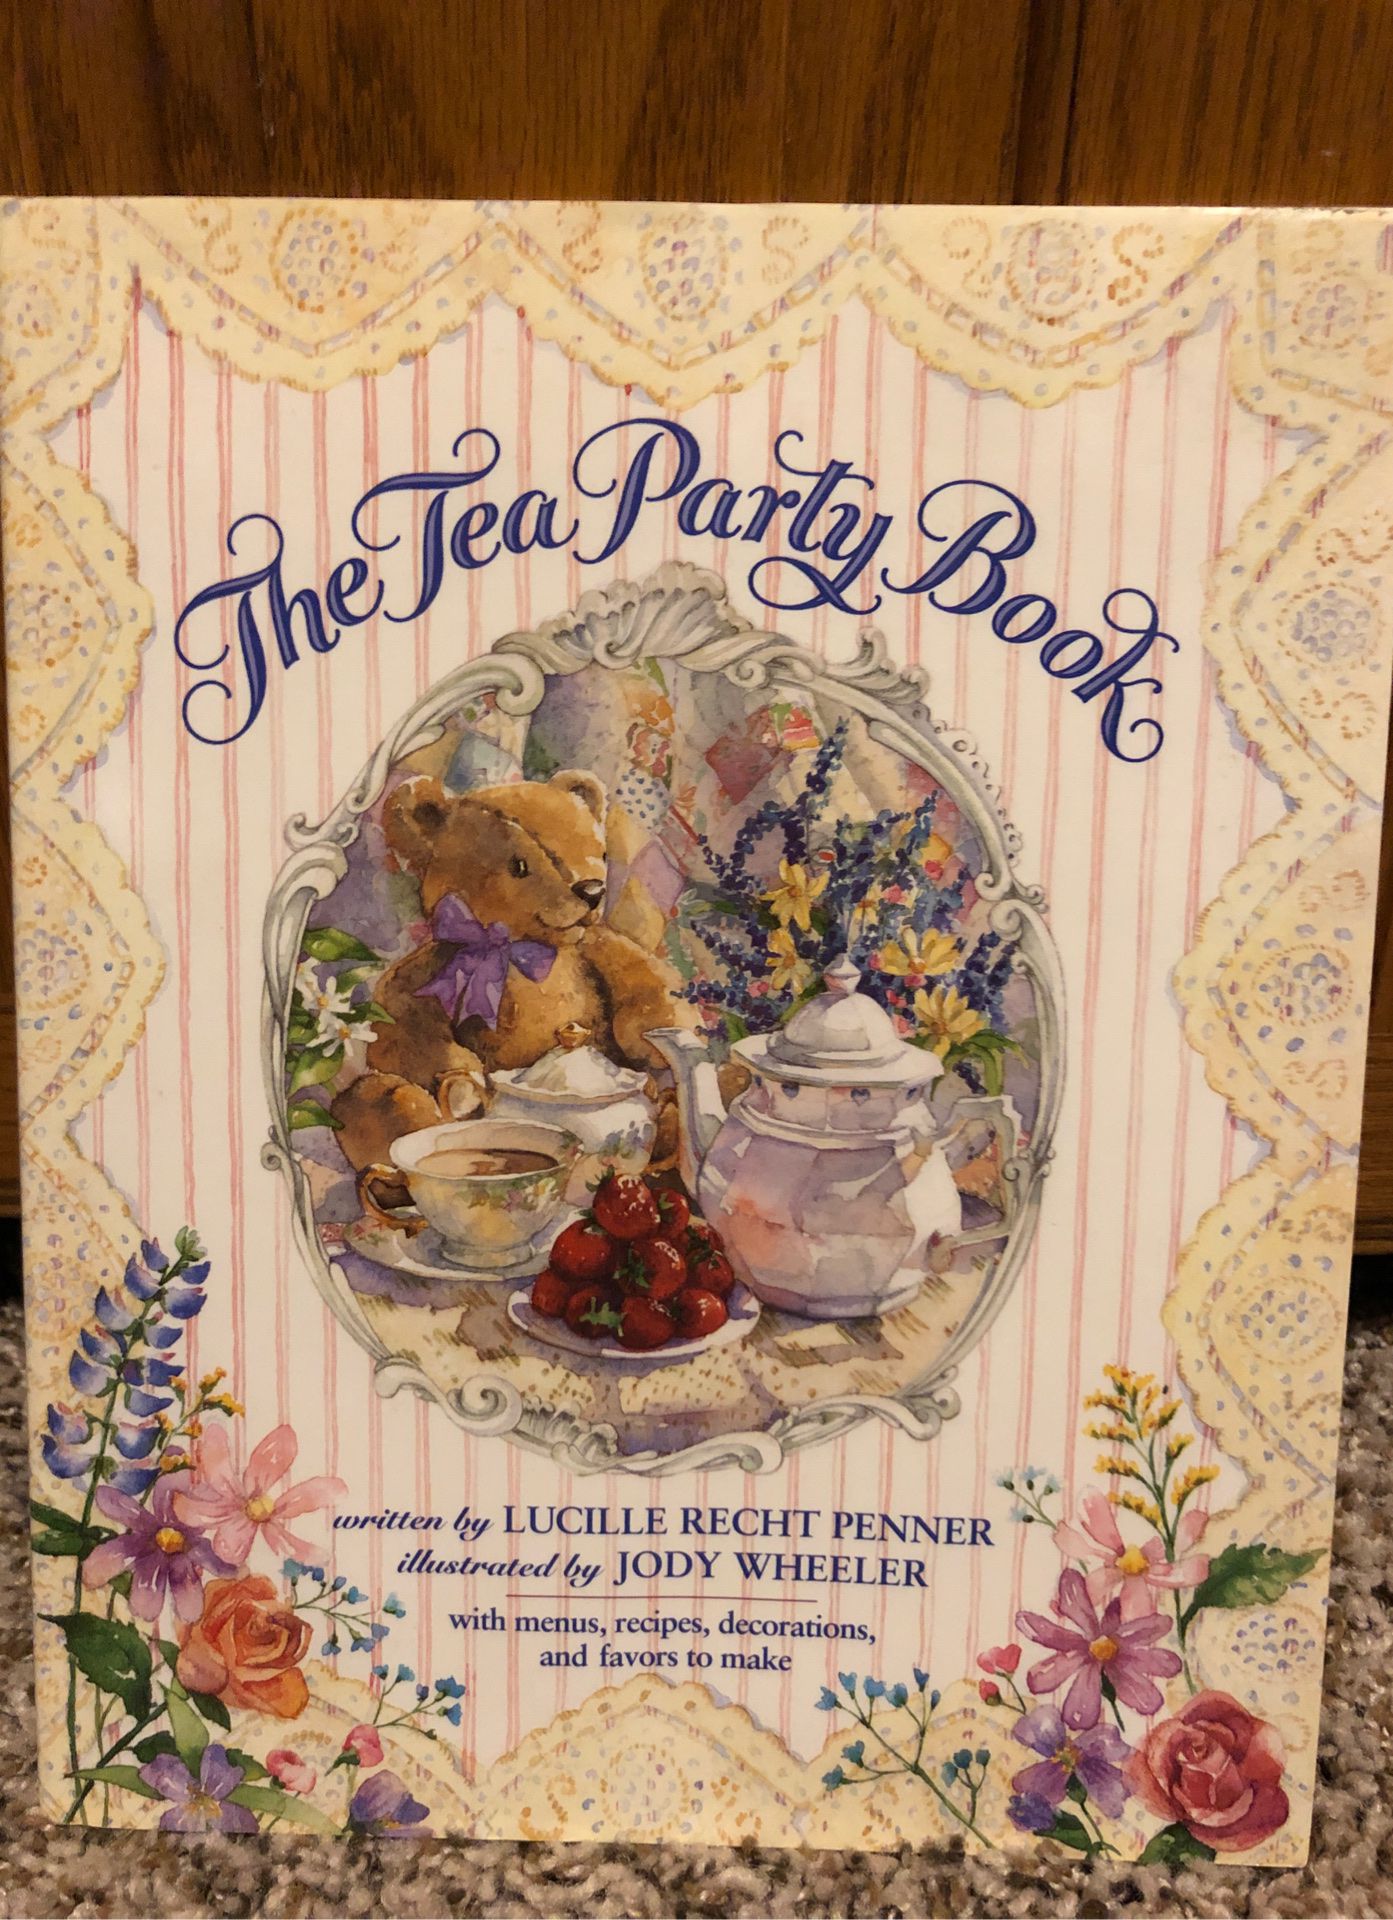 The Tea Party Book by Lucille Recht Penner